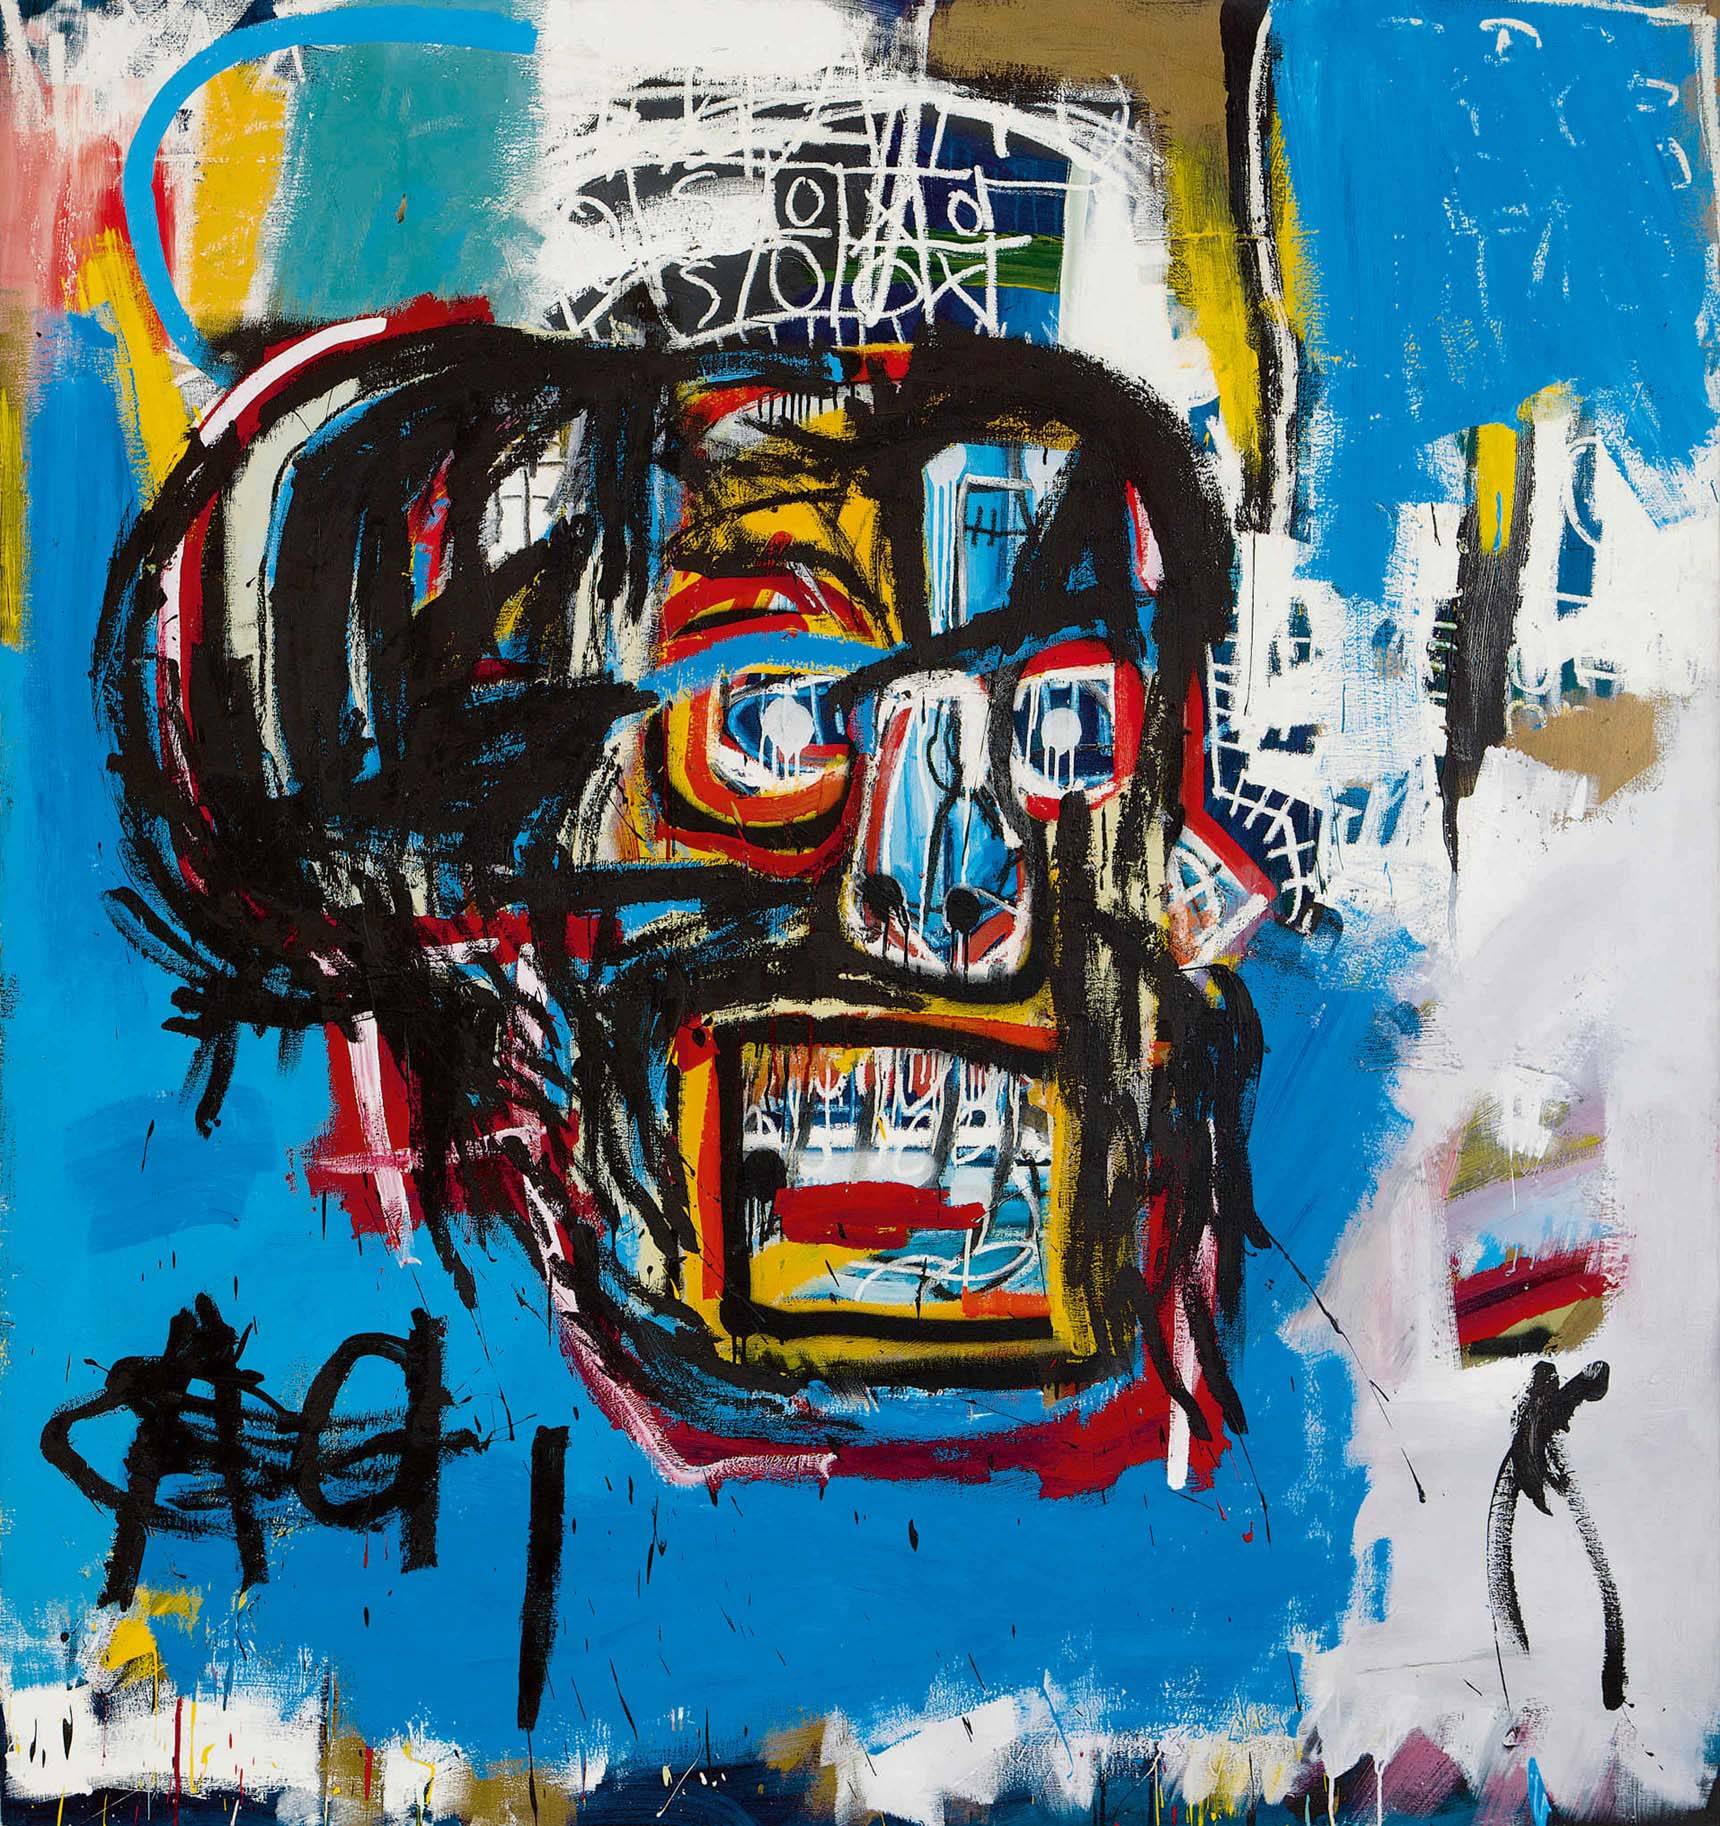 Untitled (1982), made by Jean-Michel Basquiat. Canvas sold by auction for 110.5 millions of dollars. 